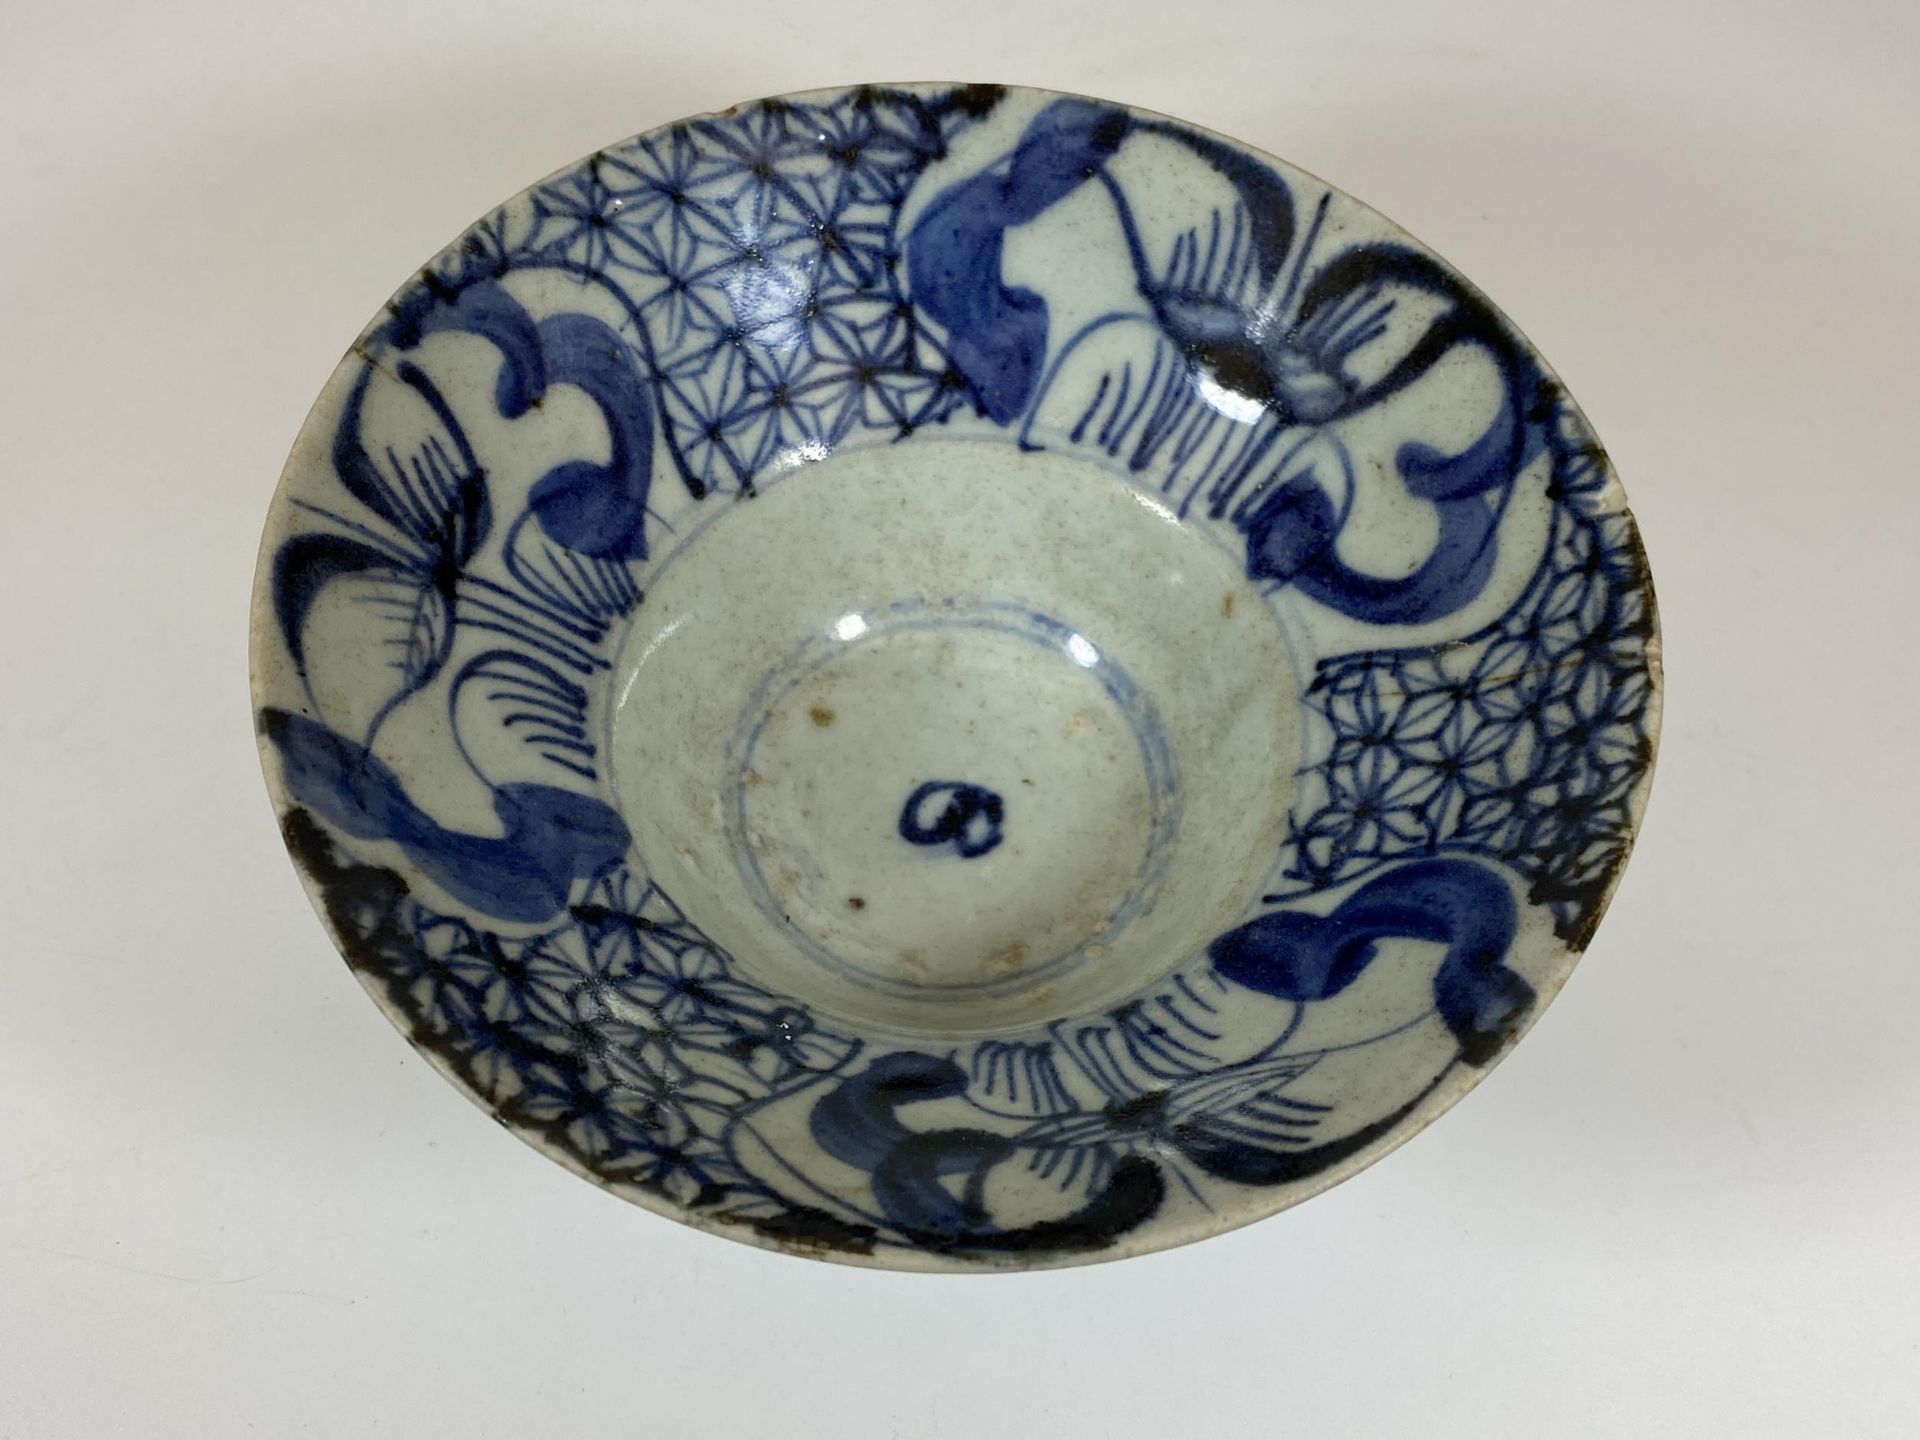 A 19TH CENTURY CHINESE QING BLUE AND WHITE PORCELAIN FOOTED BOWL, DIAMETER 15.5CM - Image 2 of 5